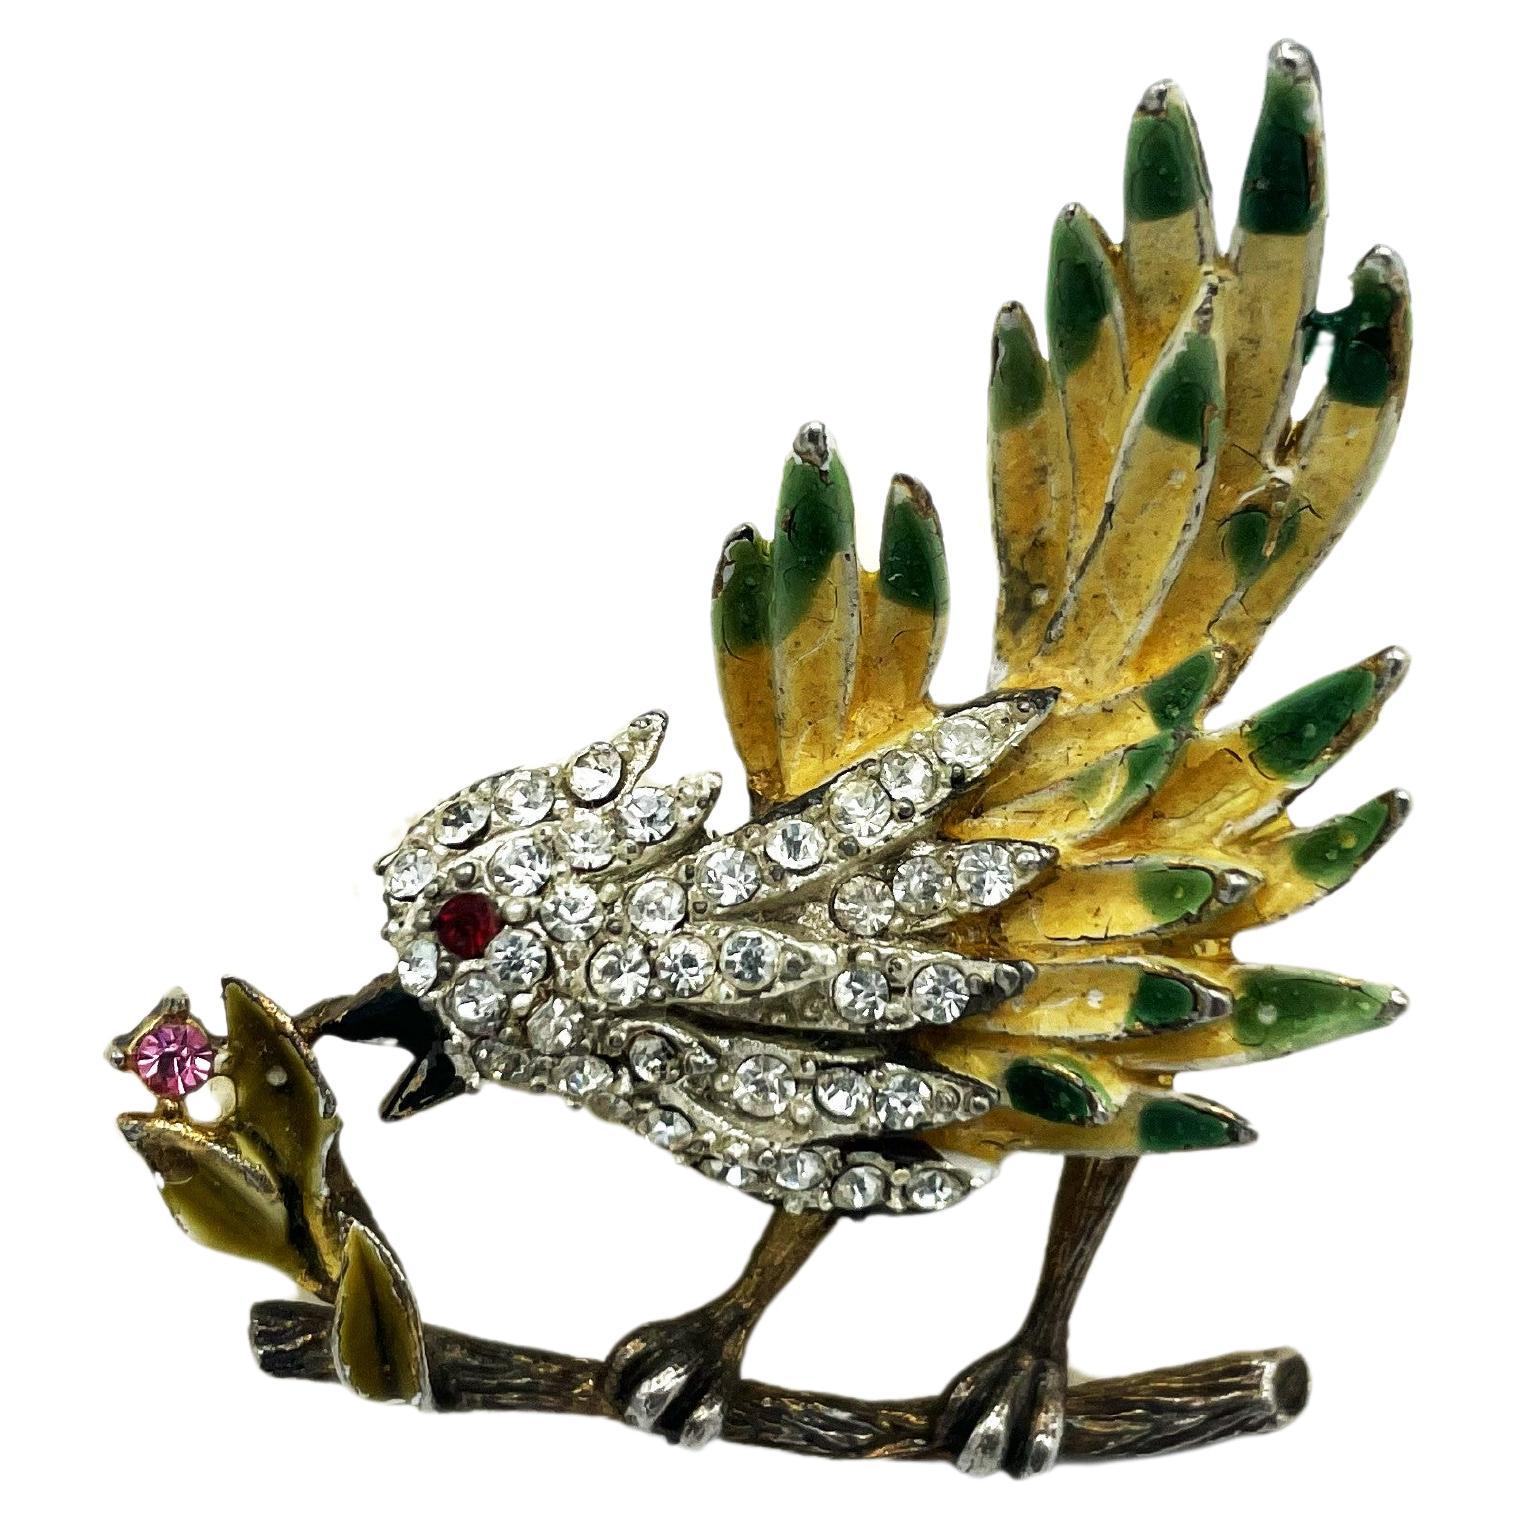 A dainty little bird brooch by Kramer NY, 1950s with lots of small rhinestones